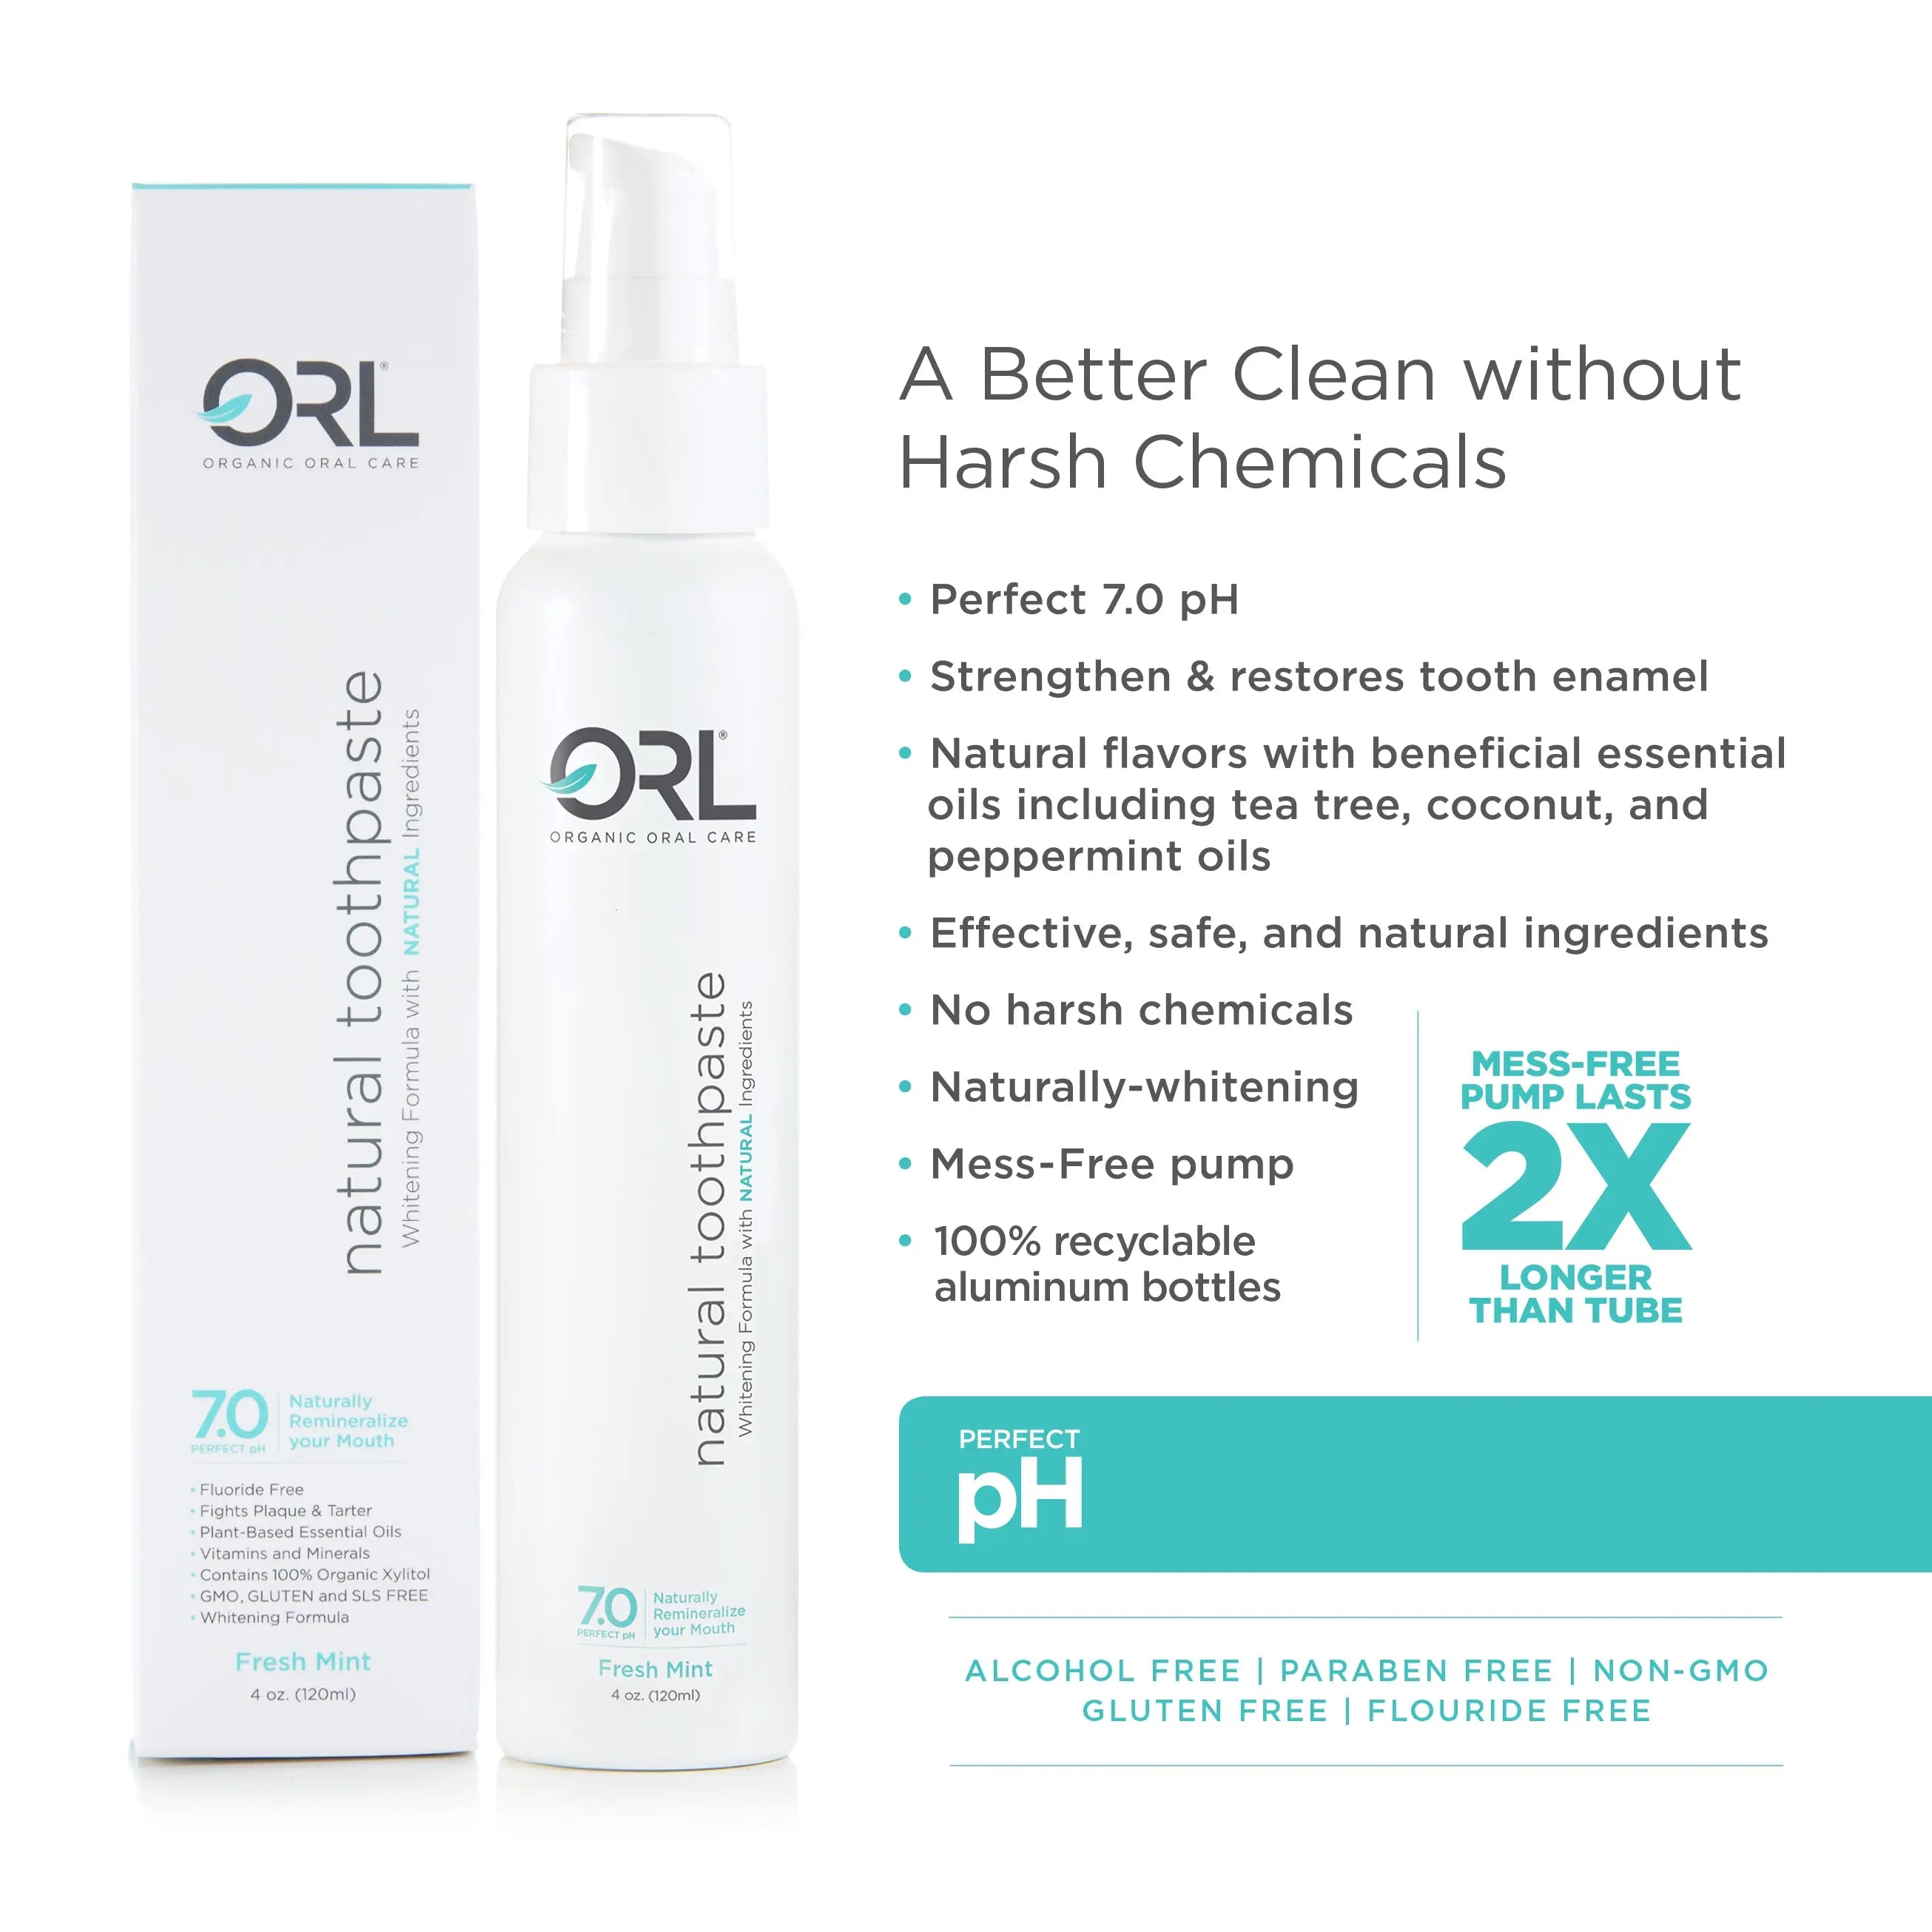 Special Offer! - Toothpaste with Hydroxyapatite ORL LABS